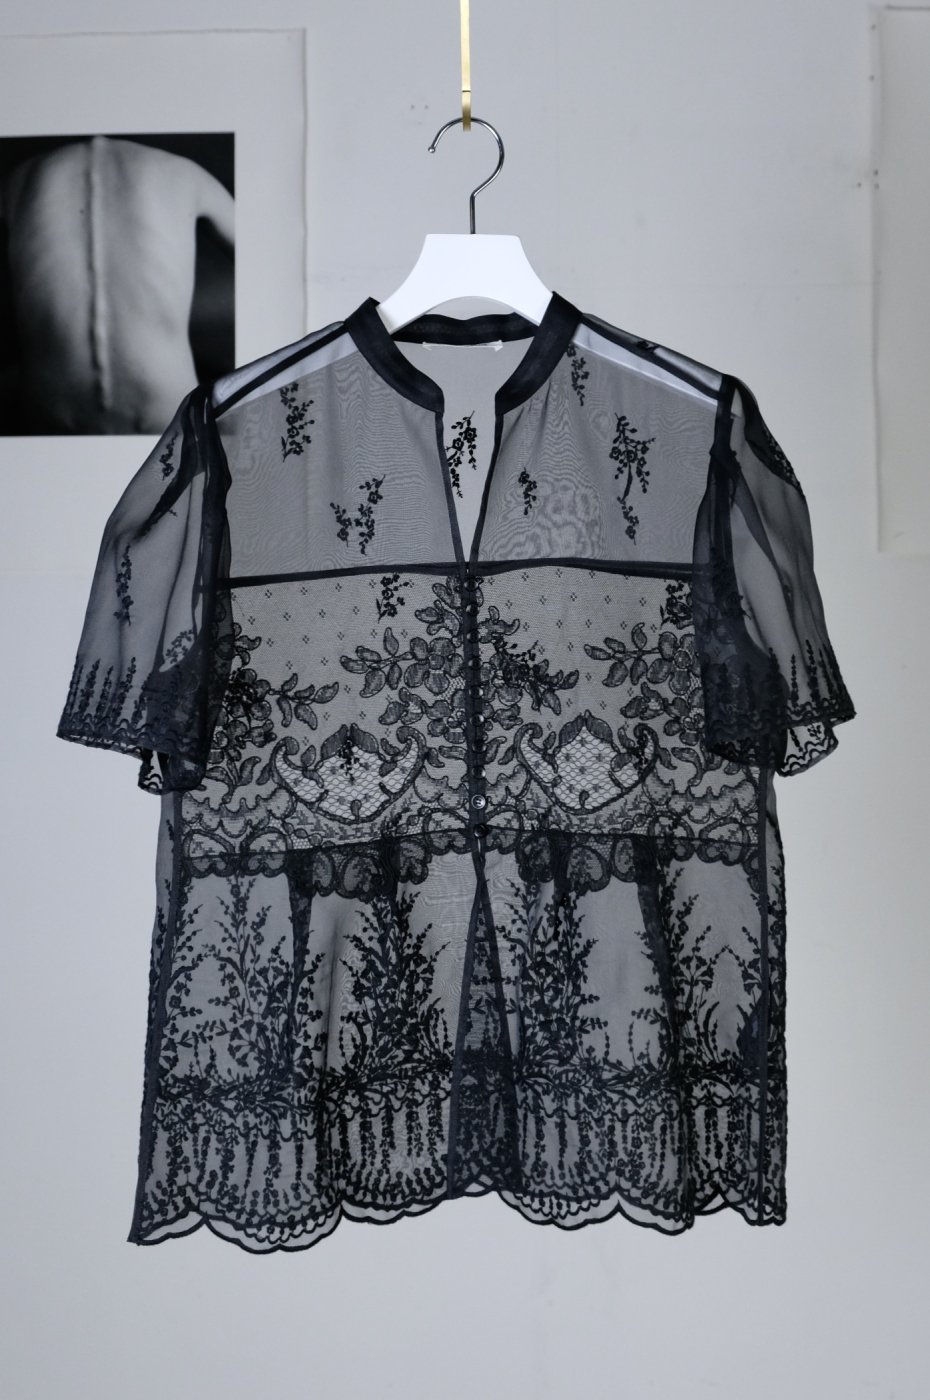 <img class='new_mark_img1' src='https://img.shop-pro.jp/img/new/icons8.gif' style='border:none;display:inline;margin:0px;padding:0px;width:auto;' />CURRENTAGE-EMBROIDERY LACE BLOUSE-BLACK